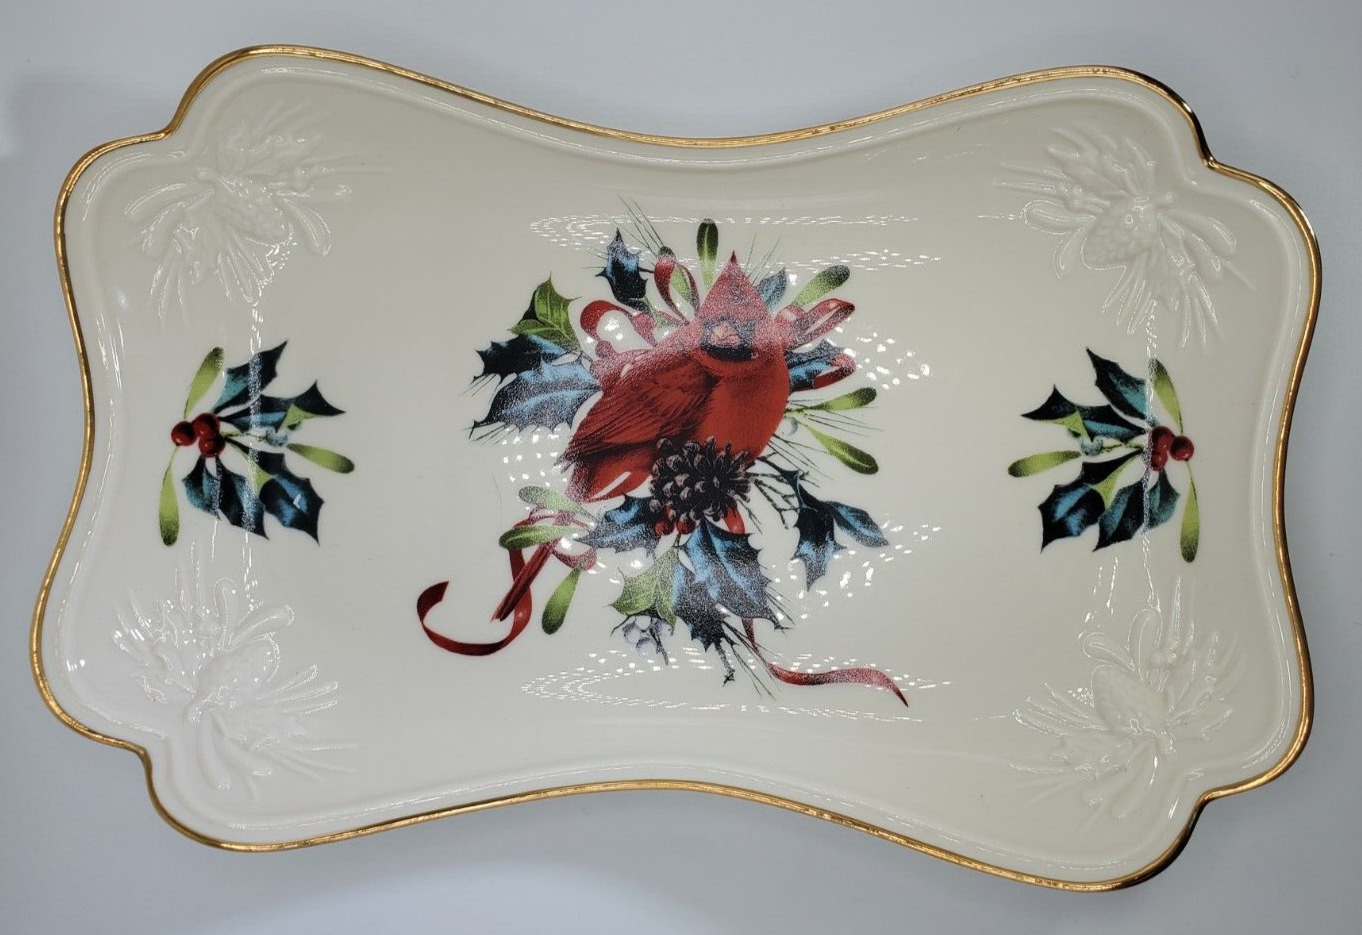 Lenox 'Winter Greetings' Porcelain Tray with Cardinal and Holly